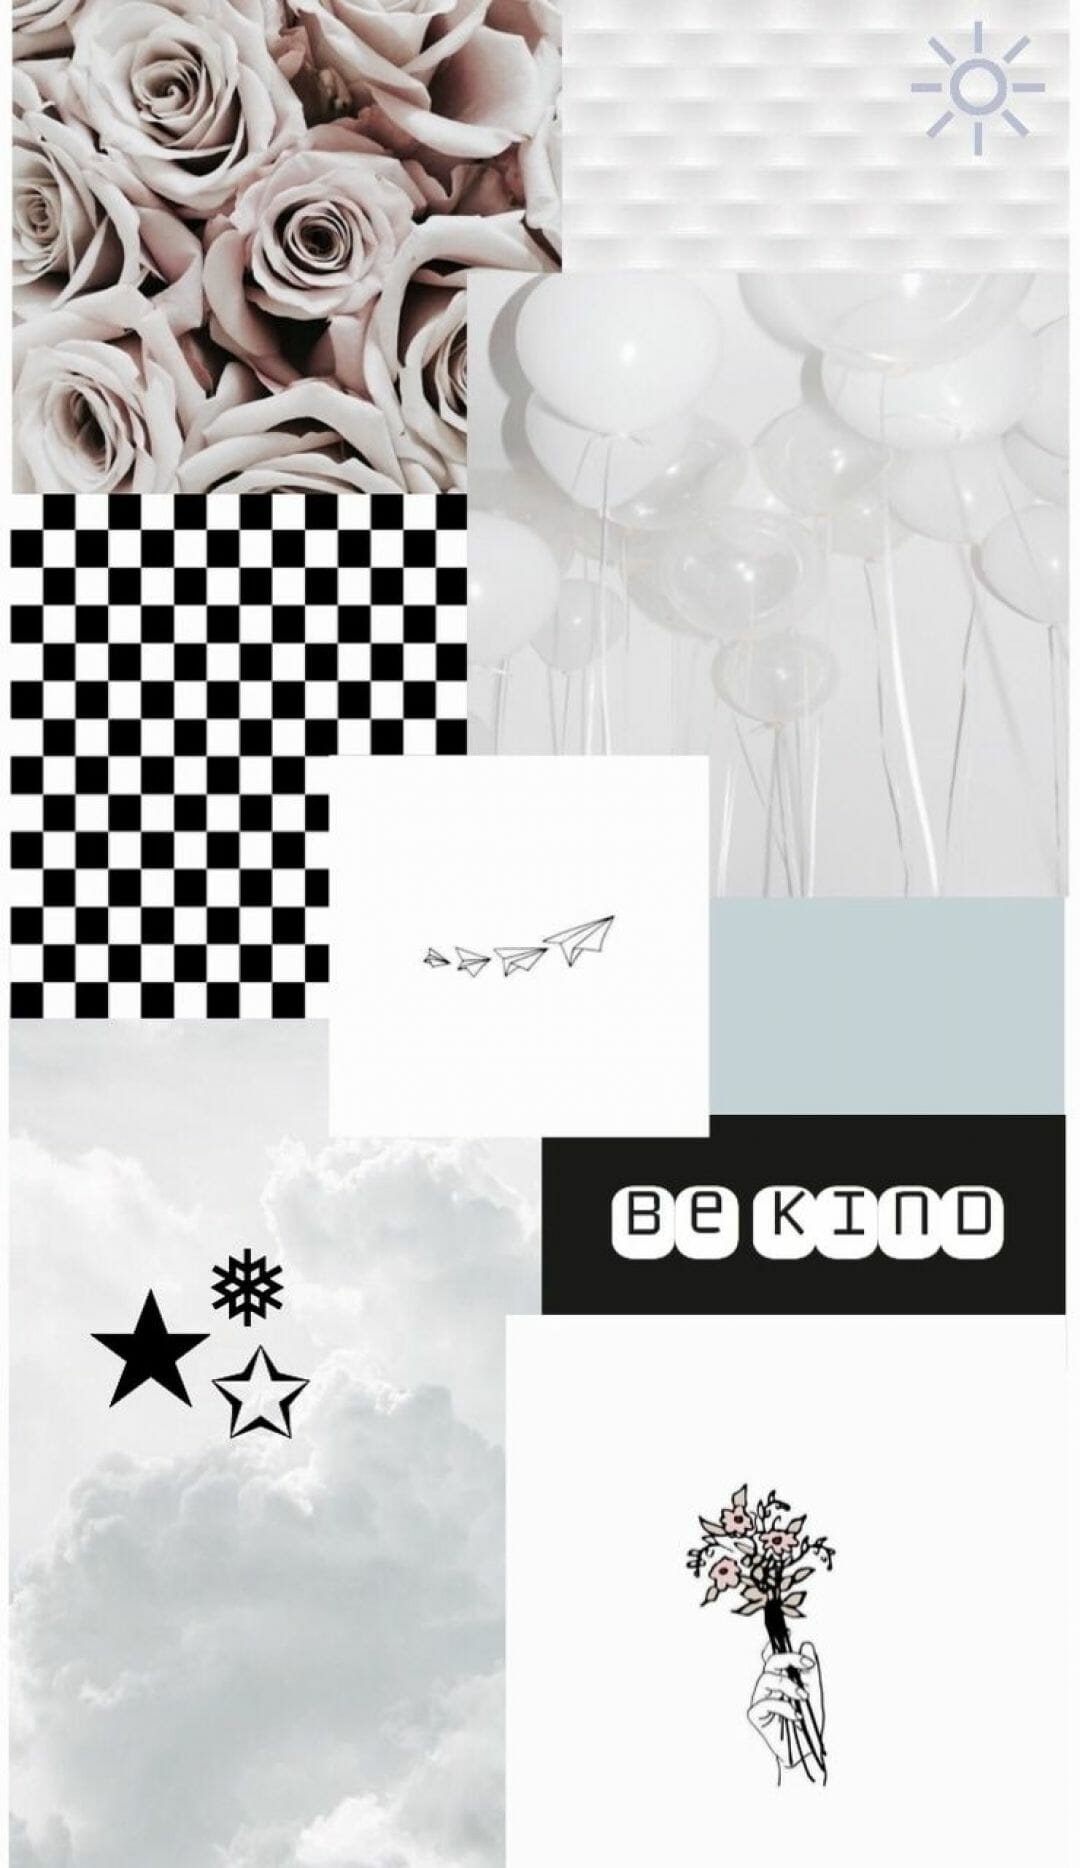 Aesthetic wallpaper with roses, balloons, clouds, and a checkered pattern. Be kind. - White